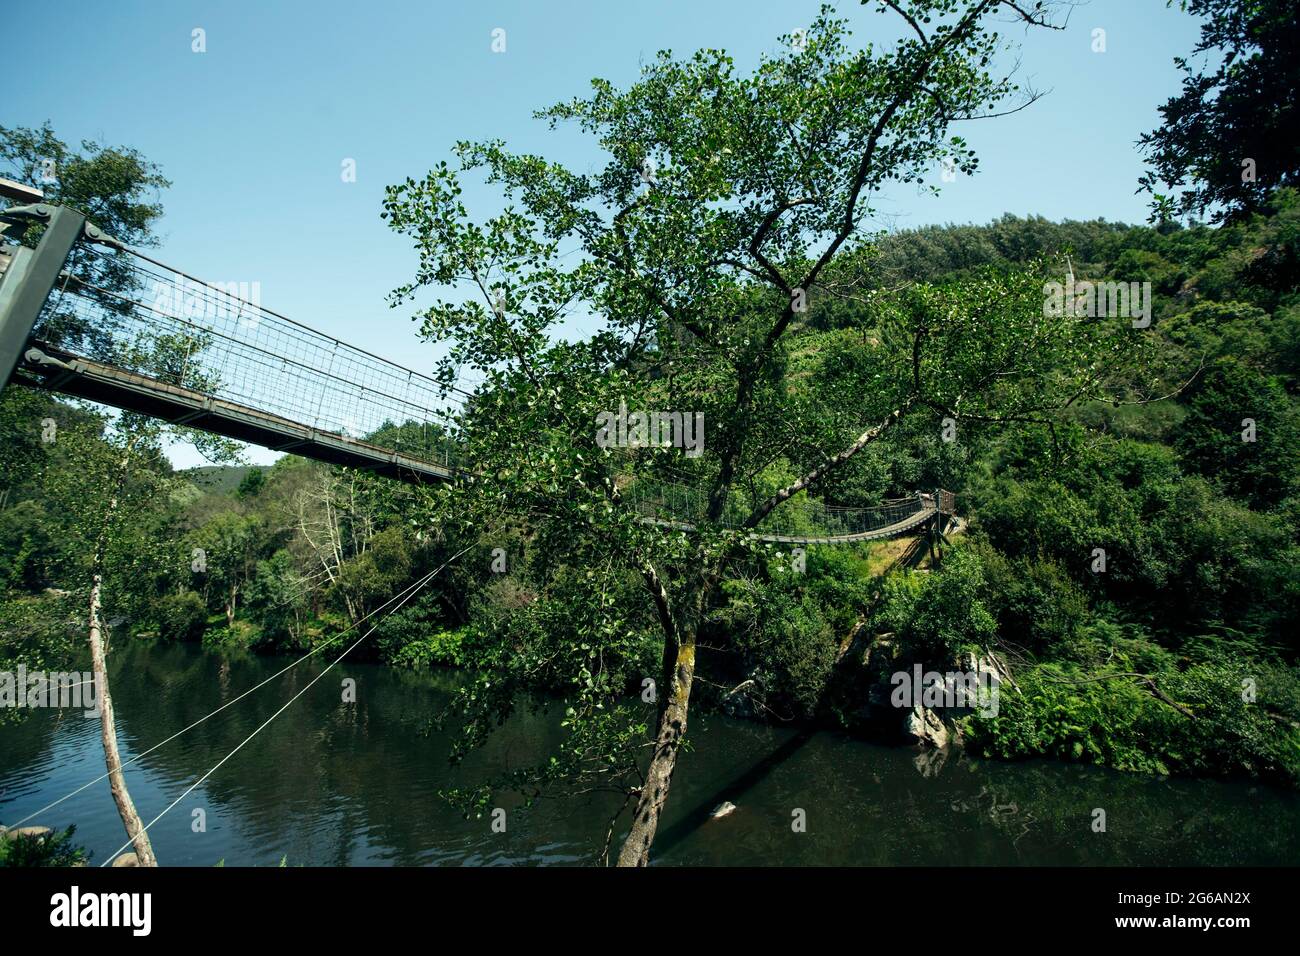 A suspension bridge over a small river in the forest. Stock Photo